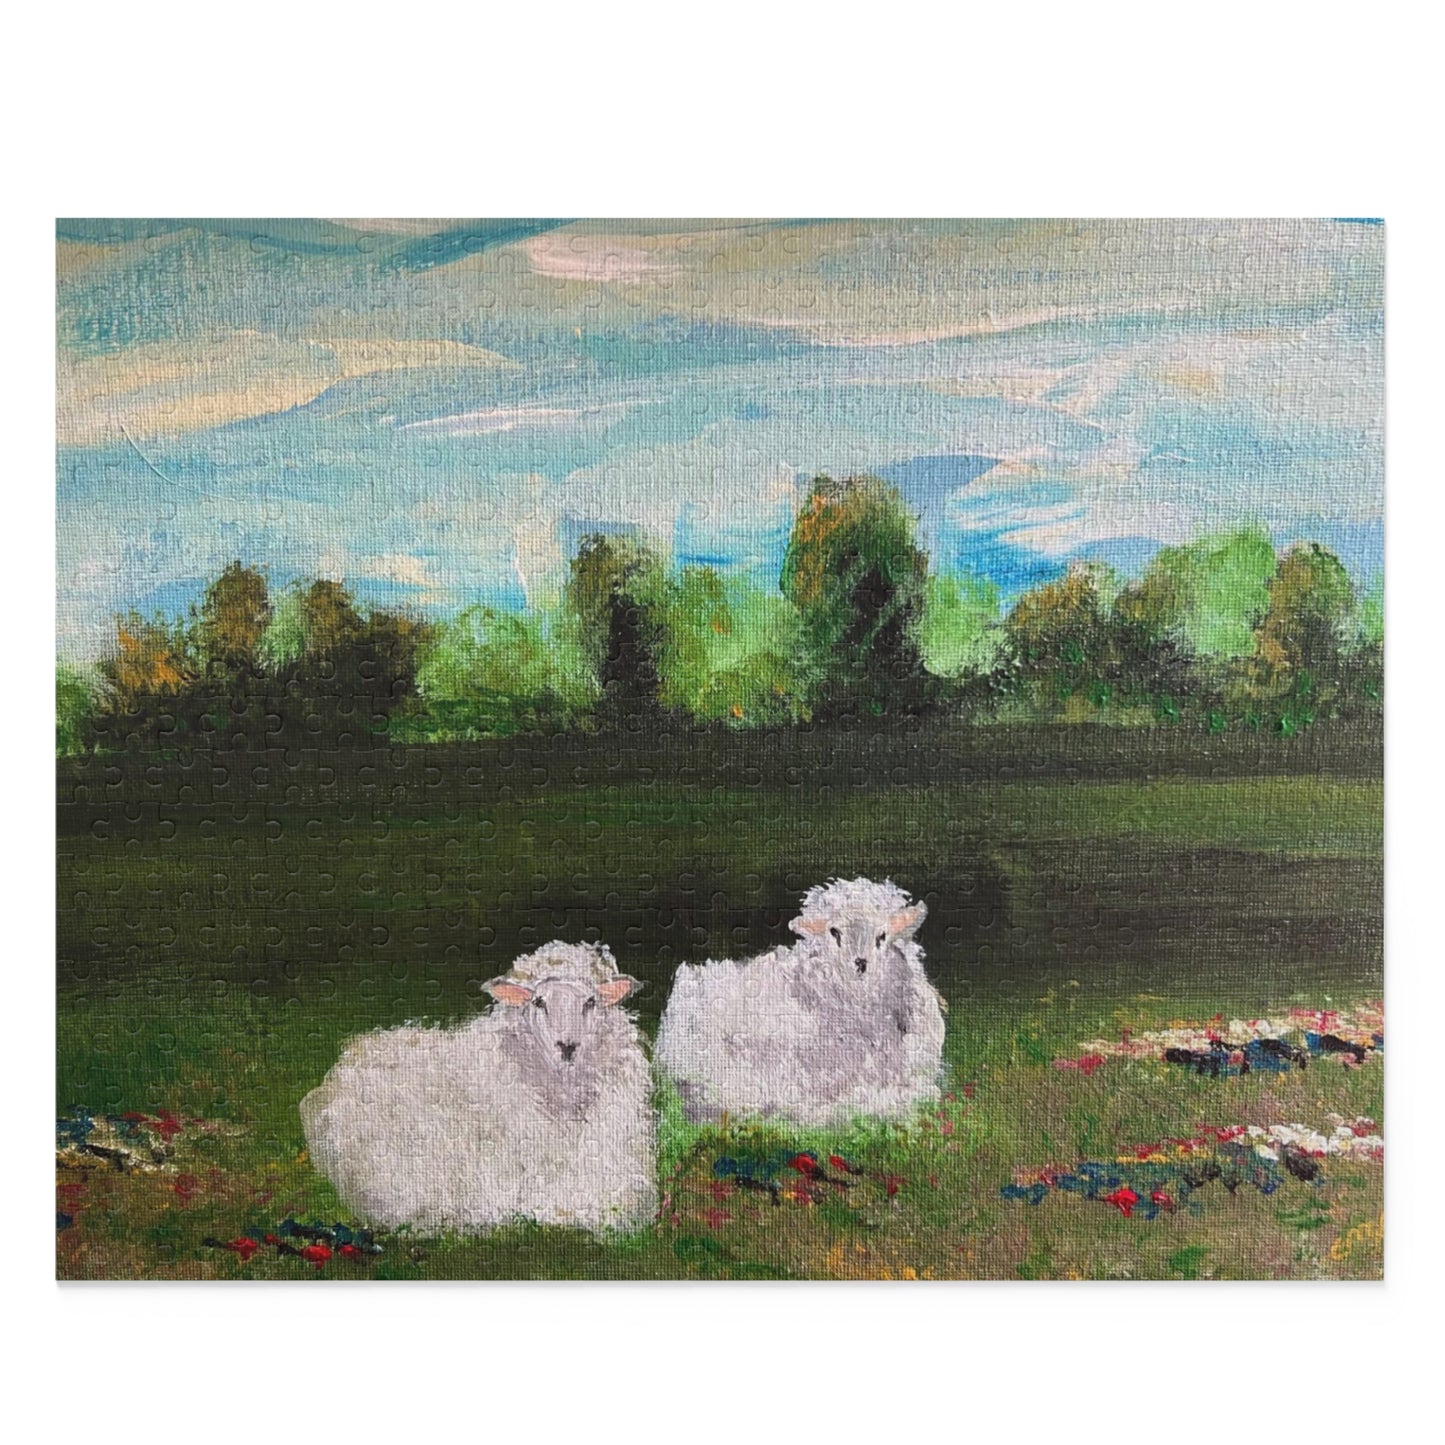 Sheep May Safely Rest 500 Piece Puzzle